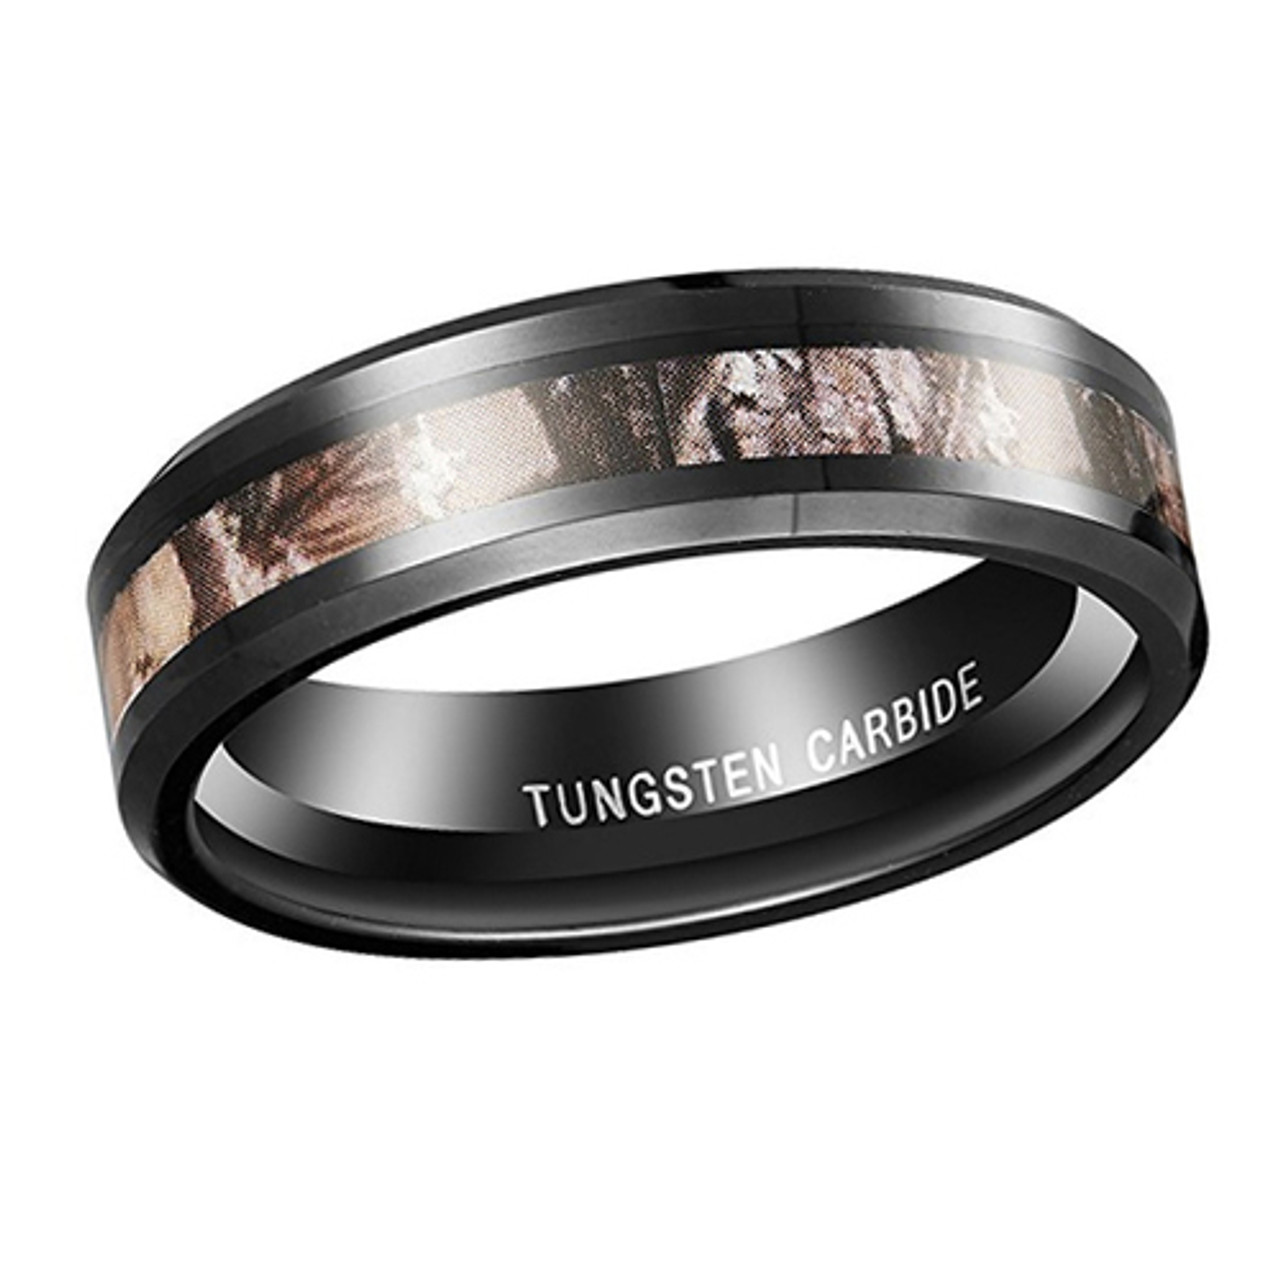 (6mm) Unisex, Women's Black Band with Camouflage Light Tan Inlay Tungsten carbide Wedding Ring Band.